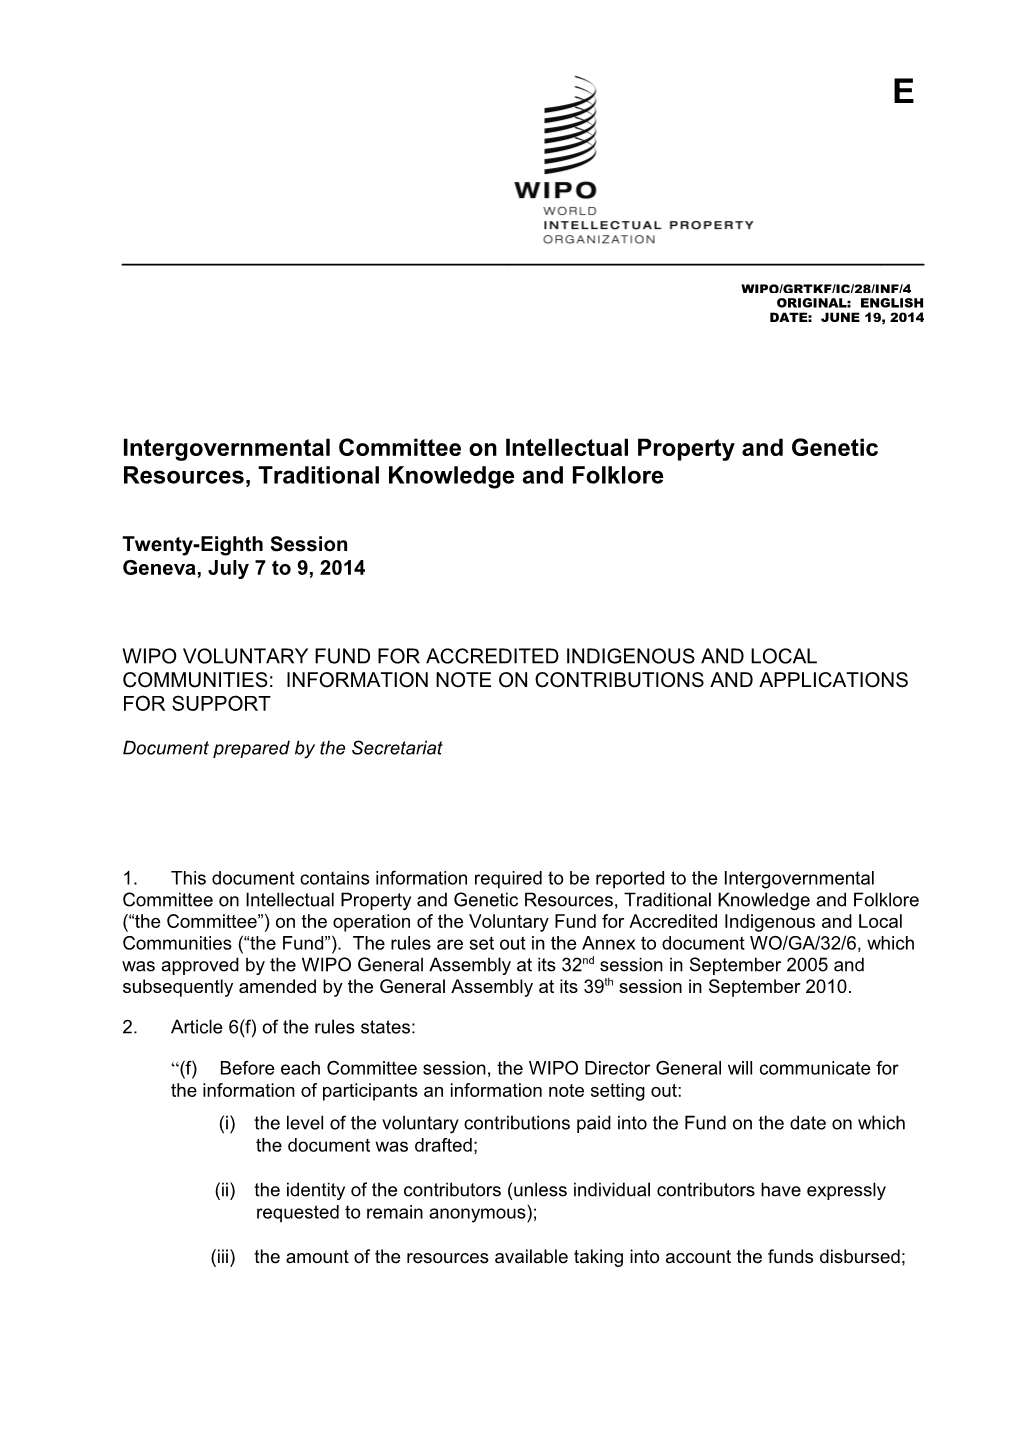 Intergovernmental Committee on Intellectual Property and Genetic Resources, Traditional s1